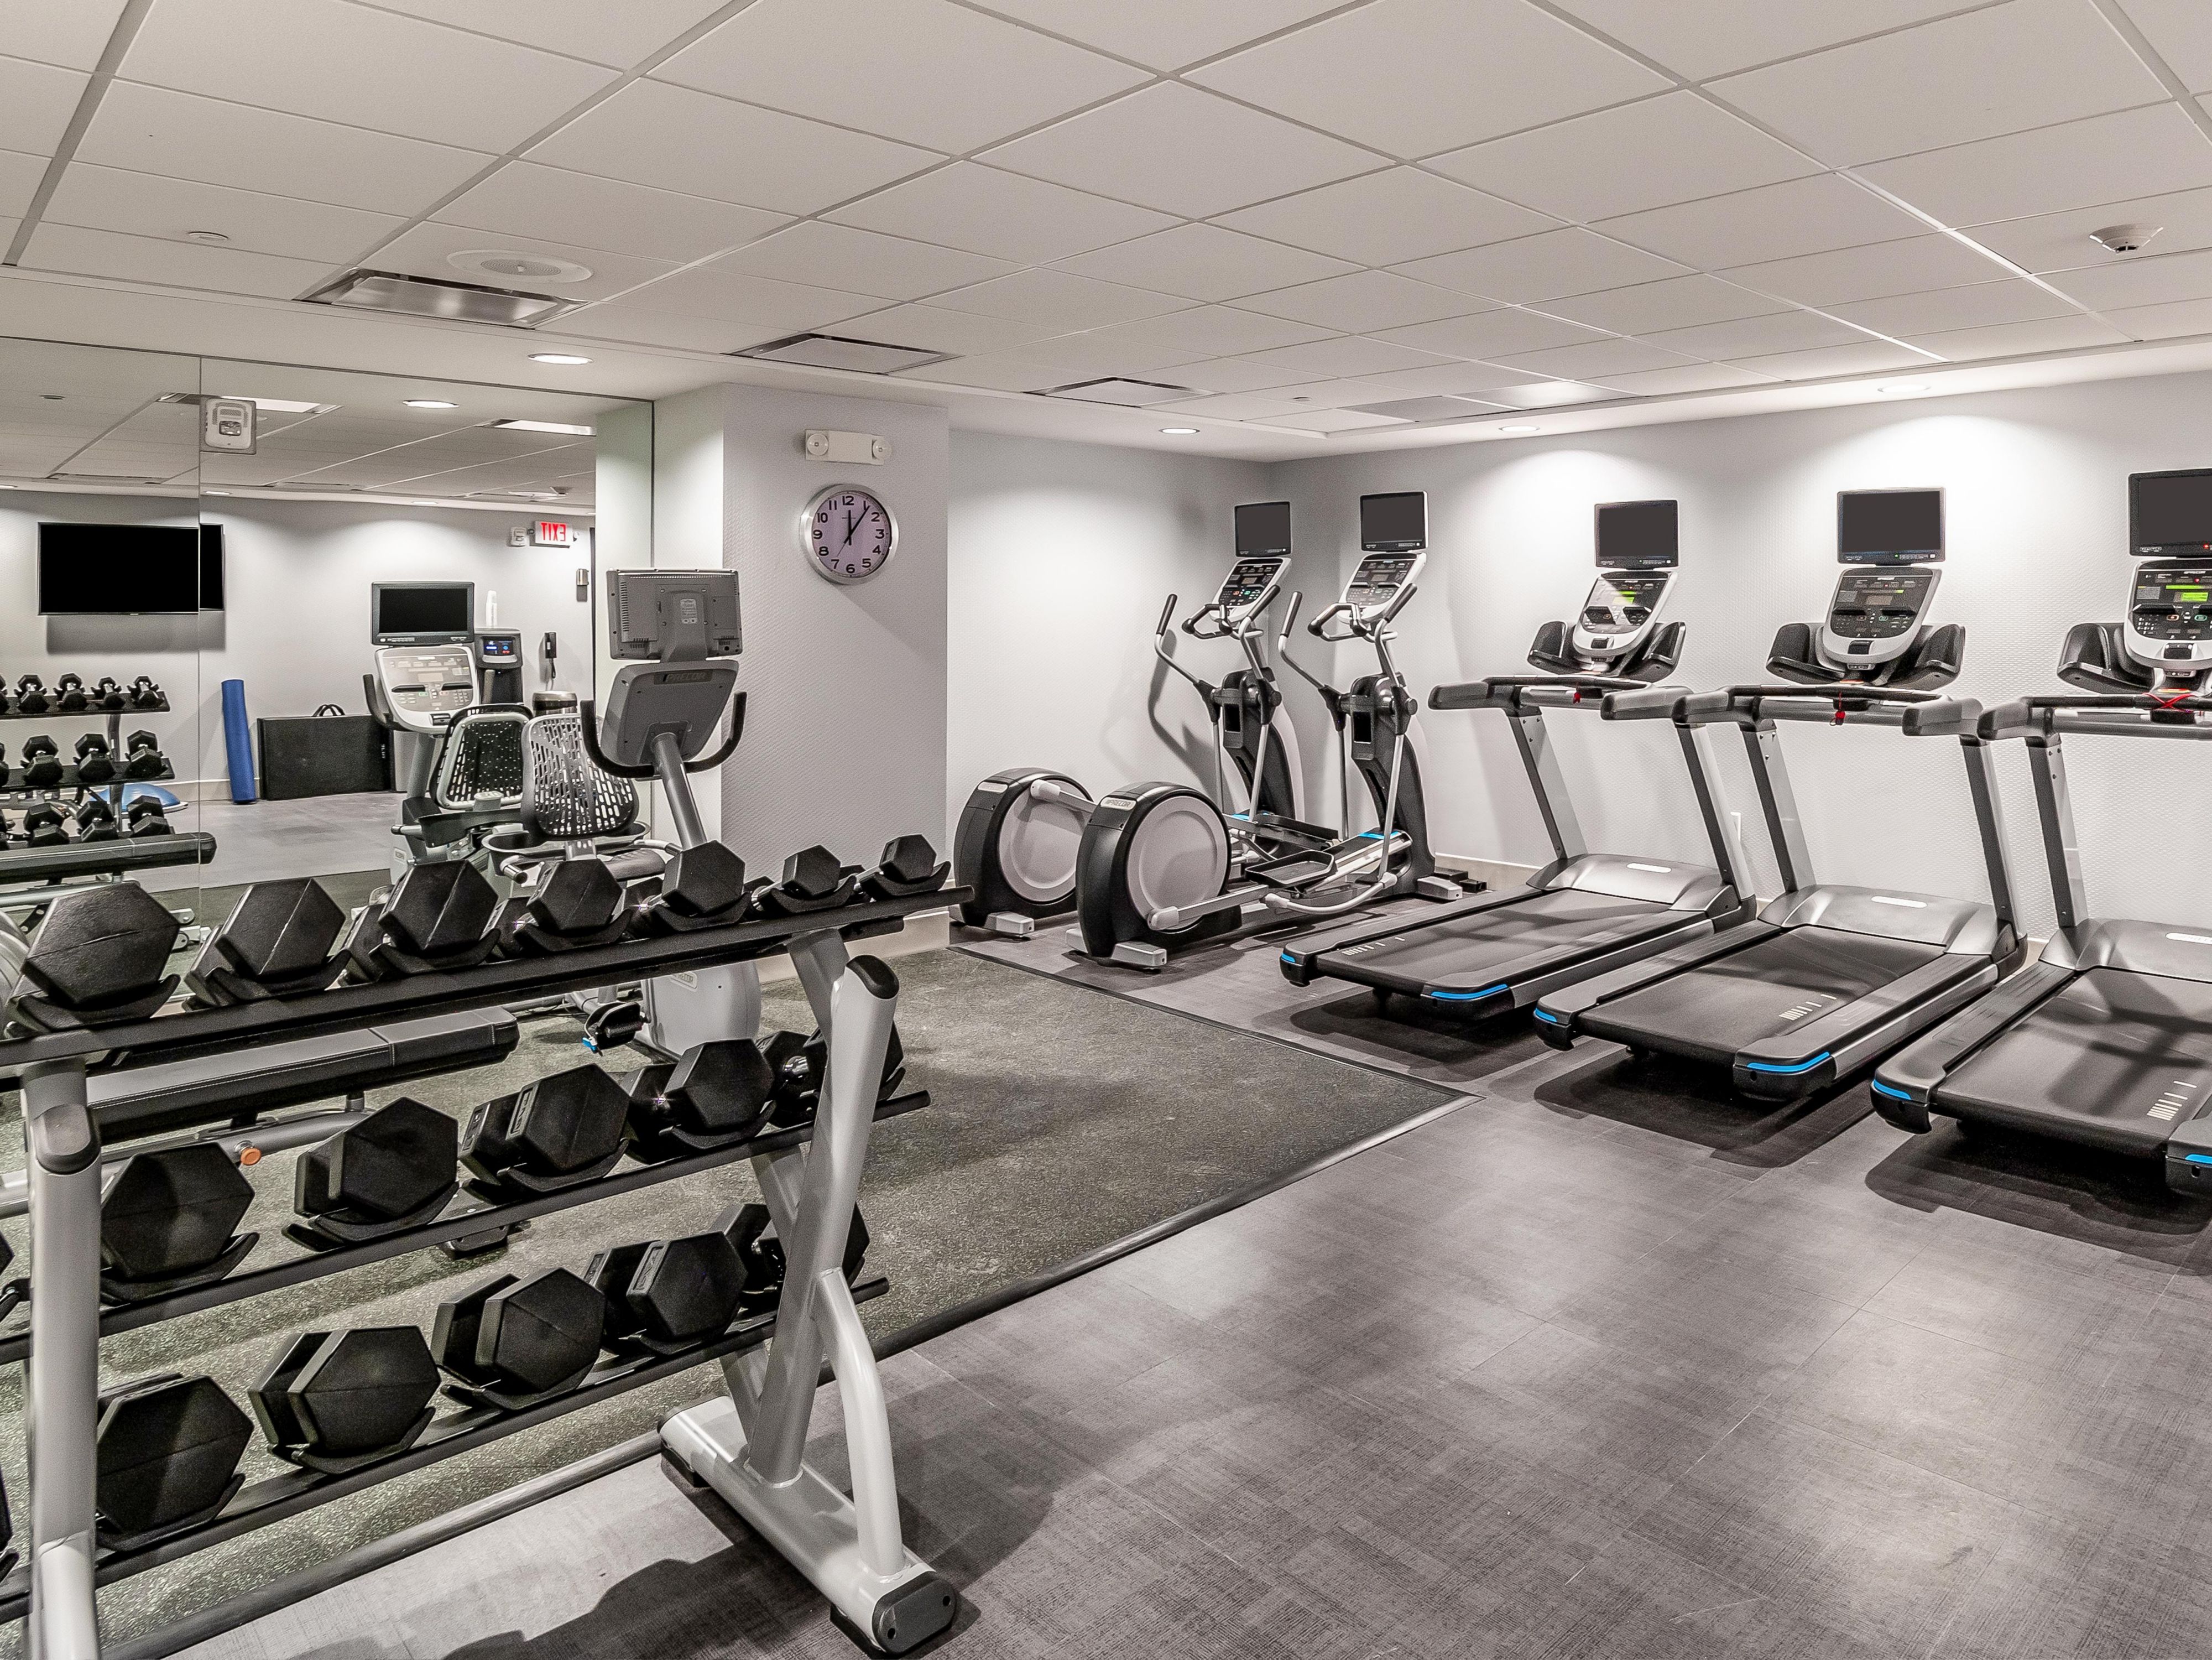 Complimentary 24-hour Fitness Center with elliptical, treadmills, and stationary bikes with the most advanced technology available. Ability to upload custom workout and watch any channel desired while working out. Free weights available as well.
